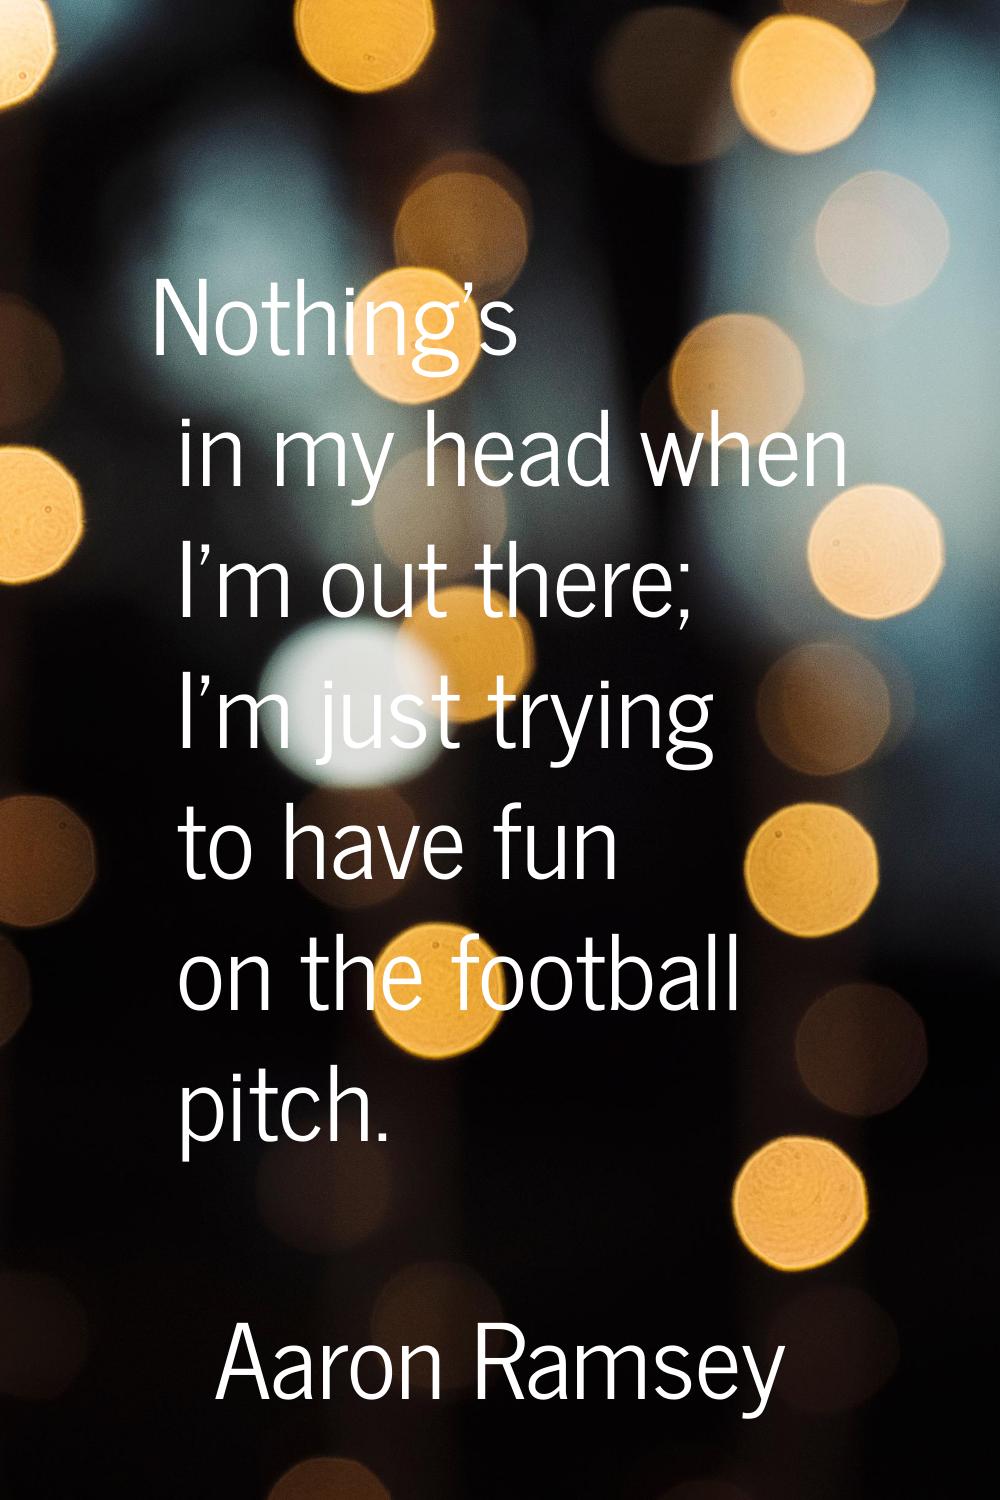 Nothing's in my head when I'm out there; I'm just trying to have fun on the football pitch.